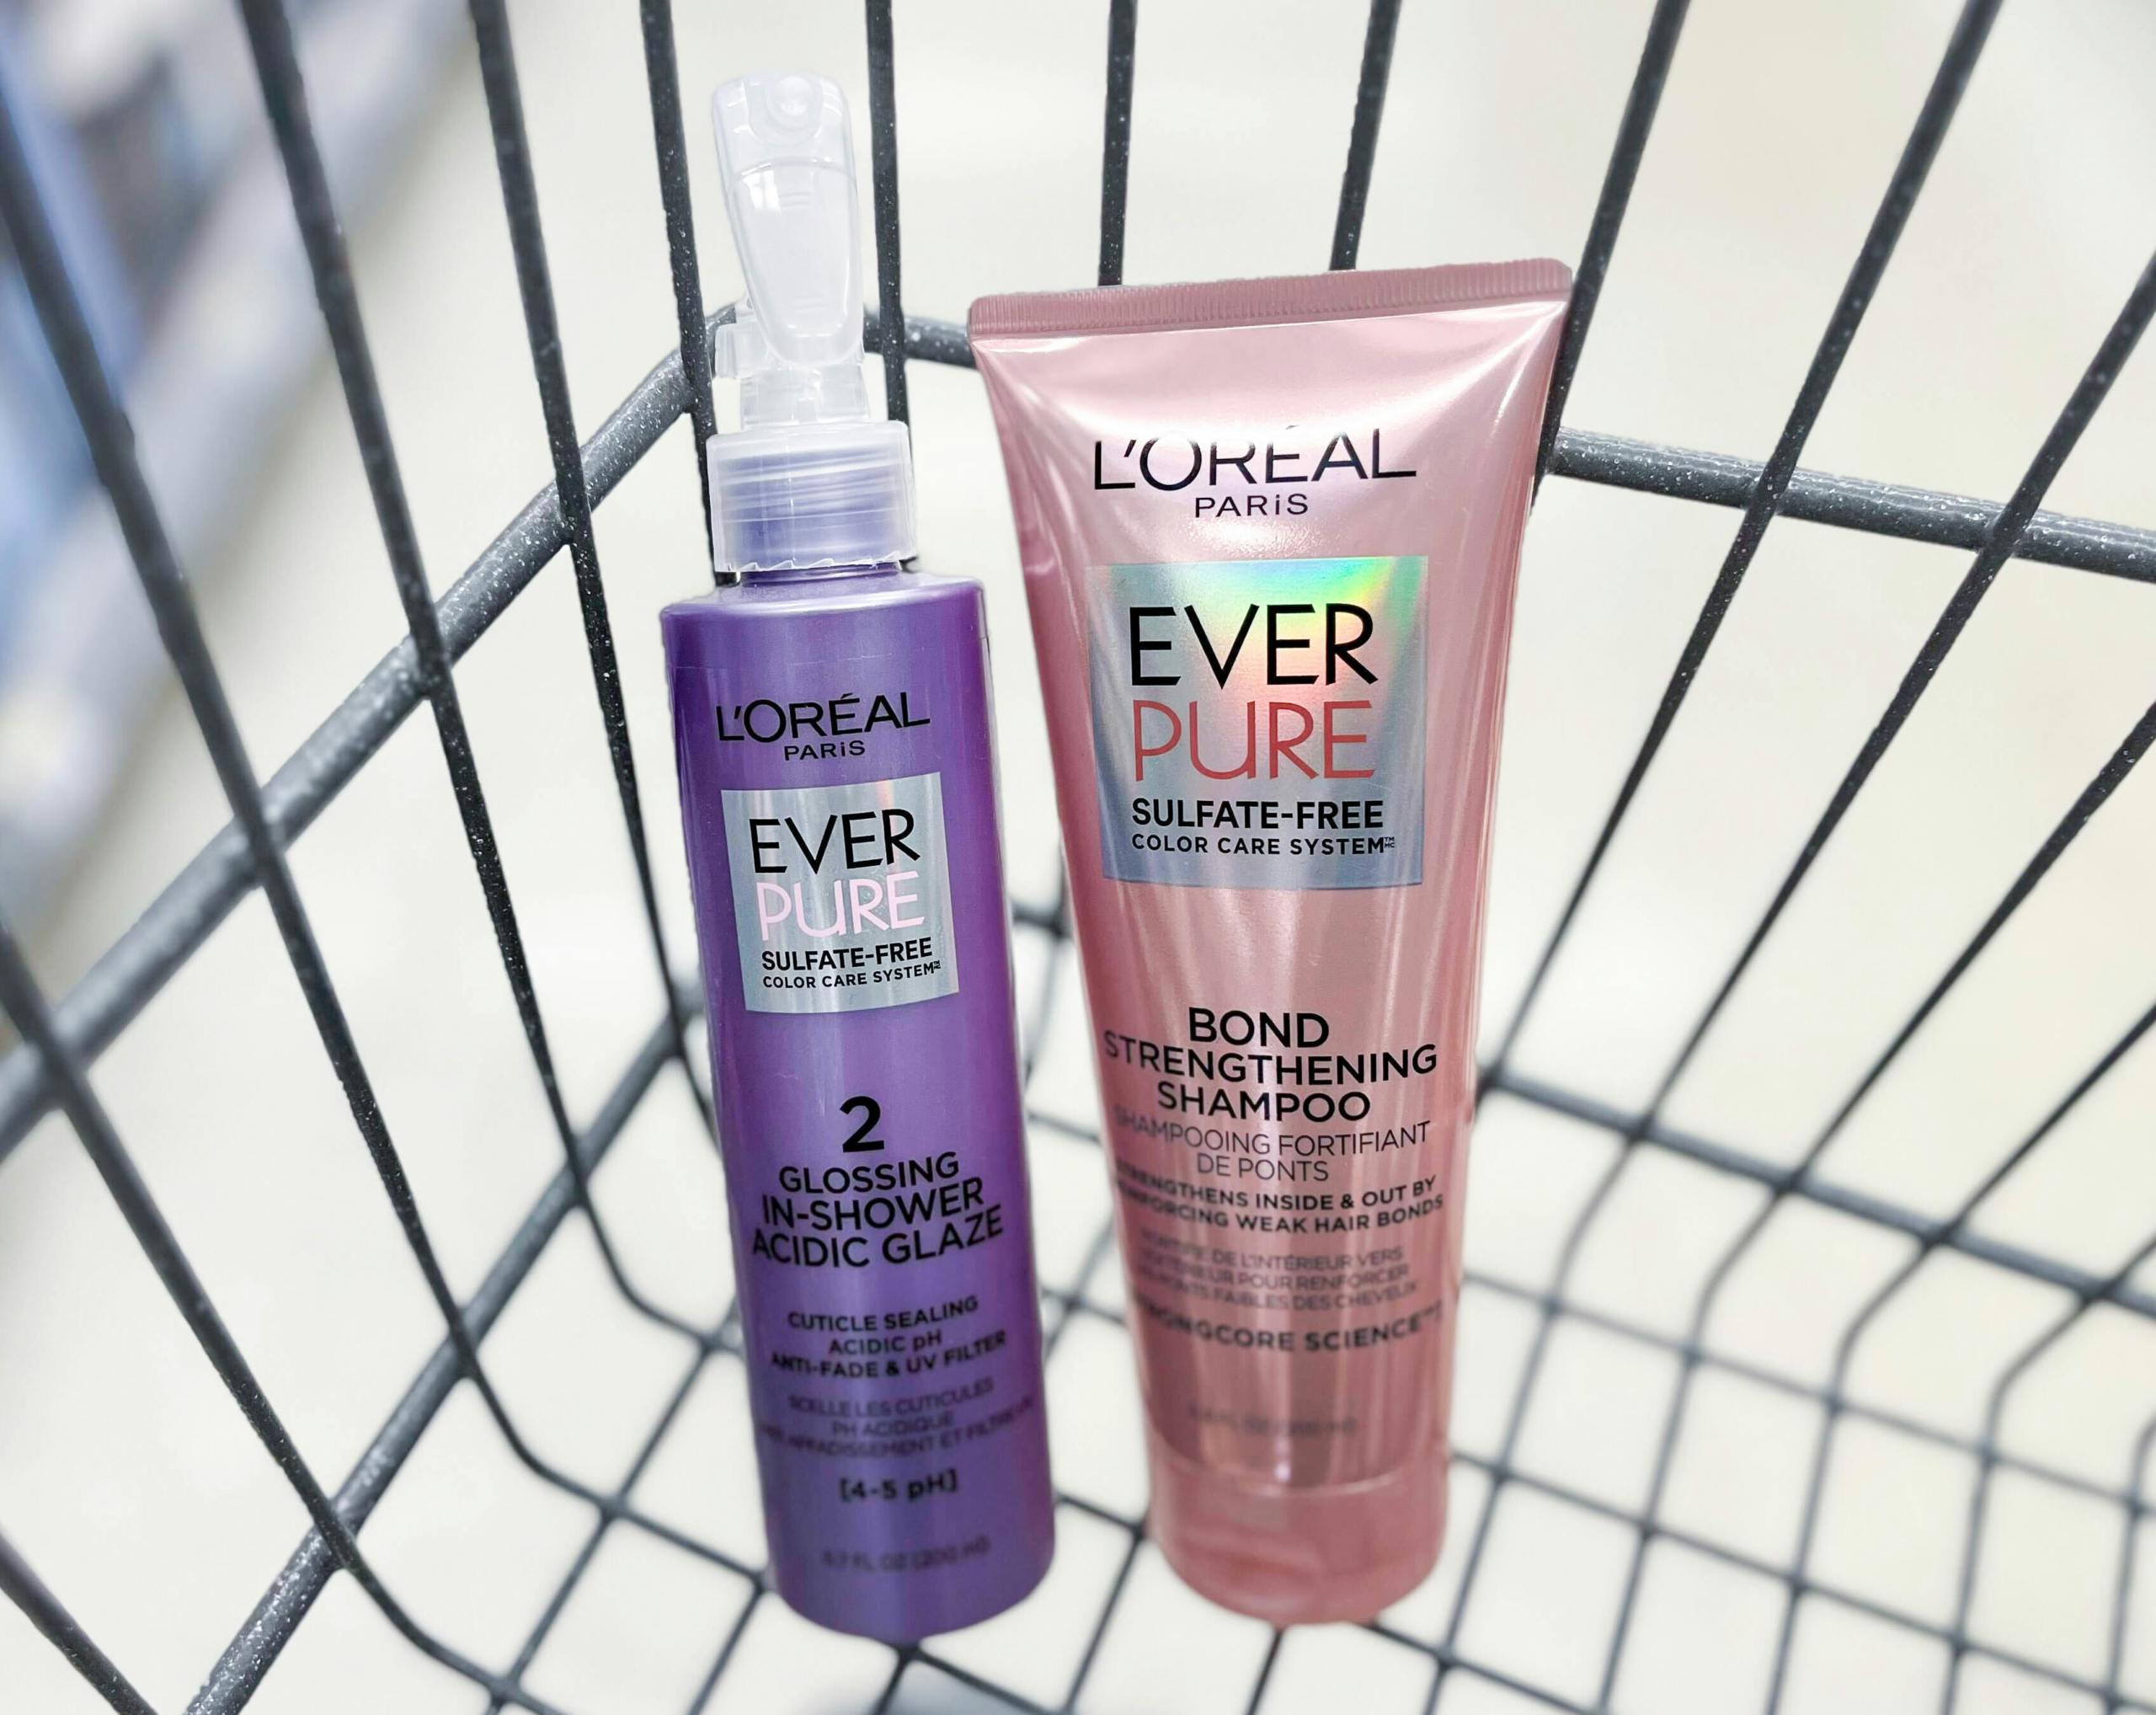 shopping cart with L'oreal Ever Pure glossing in-shower acidic glaze and bond strengthening shampoo inside